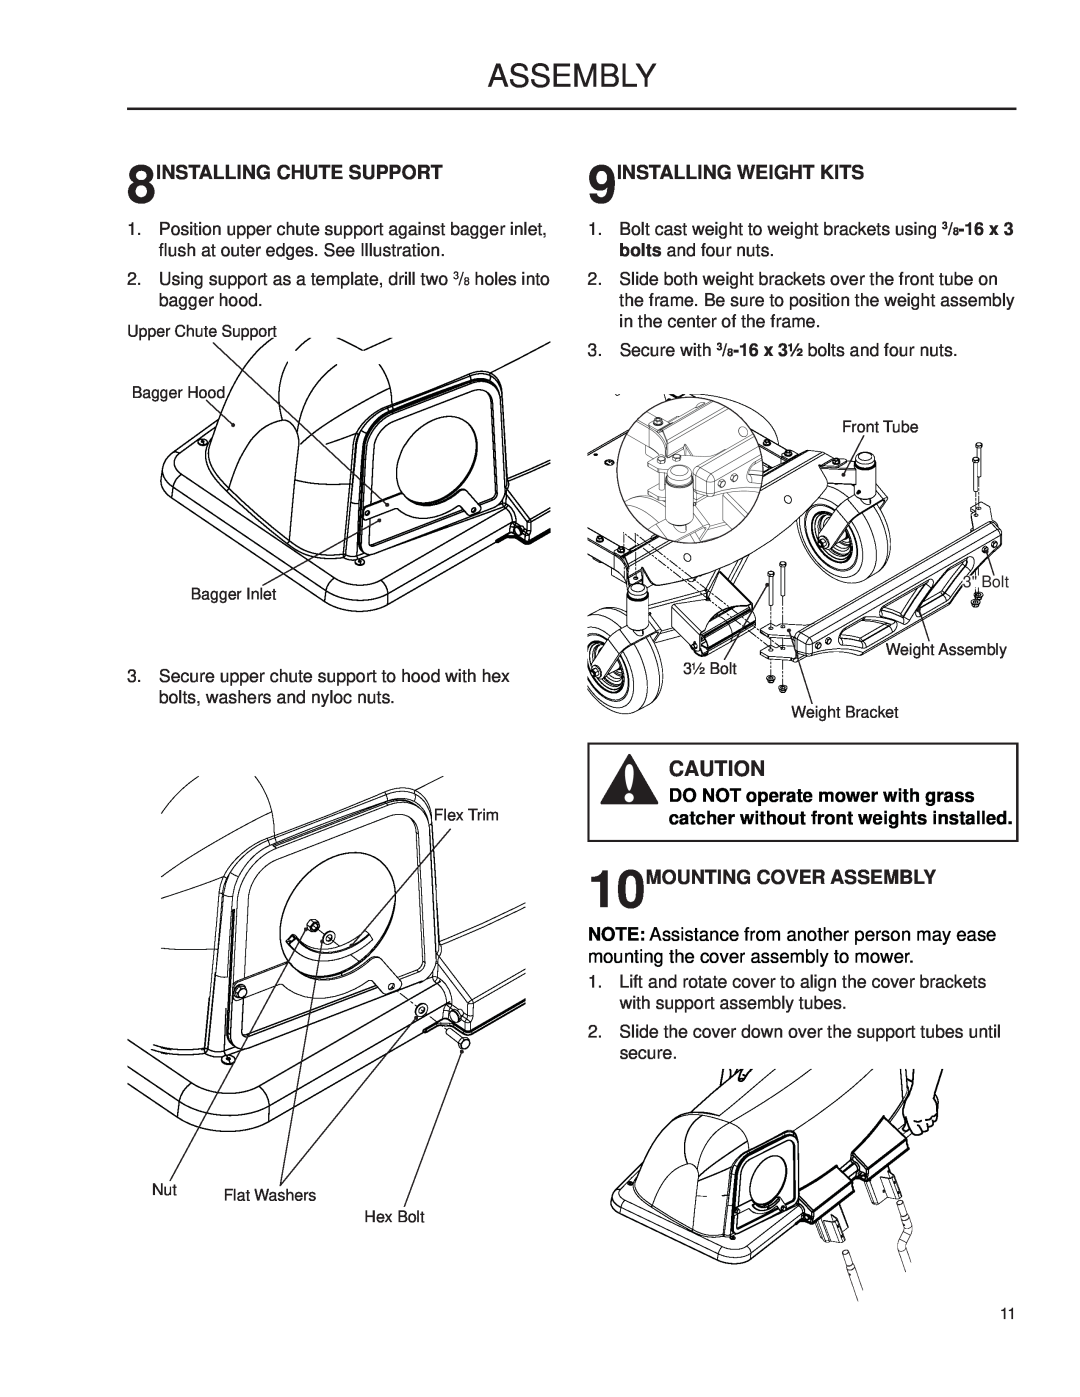 Husqvarna 966004501, 2009-01 manual Assembly, 8INSTALLING CHUTE SUPPORT, 9INSTALLING WEIGHT KITS, 10MOUNTING COVER ASSEMBLY 